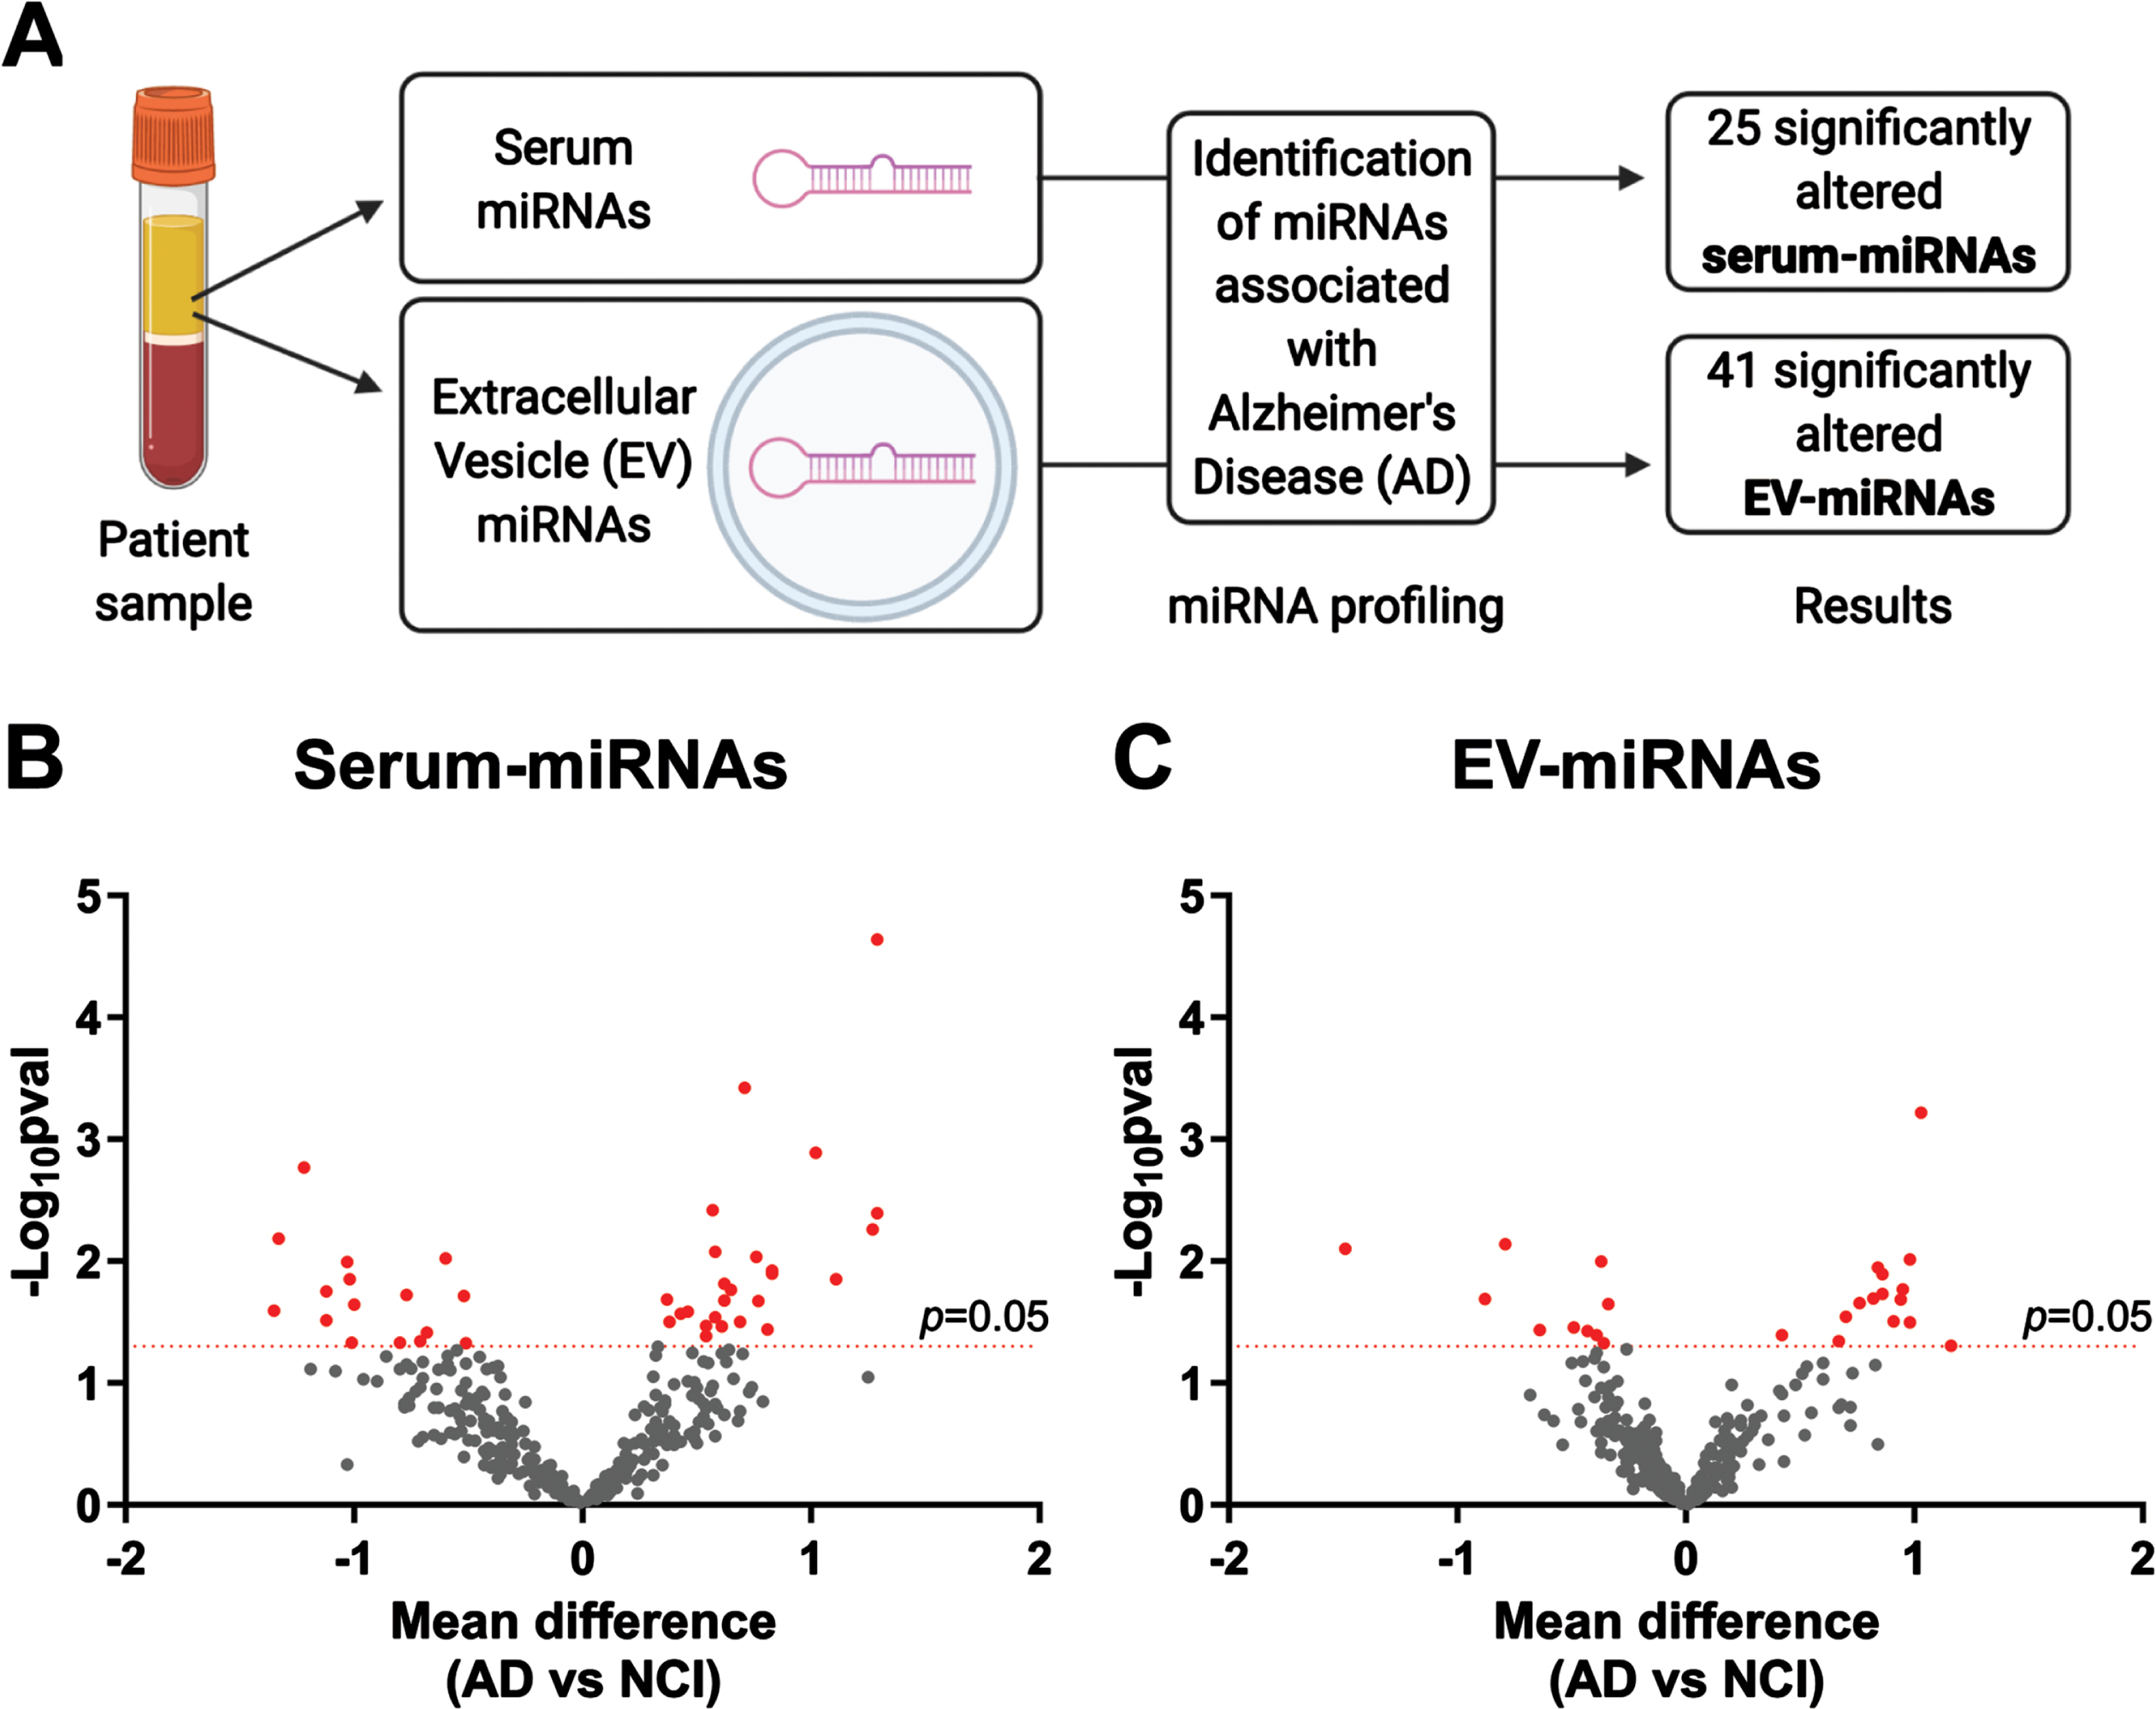 Profiling of serum-miRNAs and EV-miRNAs in AD. (A) Summary of study design and main results. Volcano plots showing the differential expression of (B) serum-miRNAs and (C) EV-miRNAs in AD patients versus NCI controls. The x-axis shows the mean difference of each miRNA expression level between AD patients and NCI controls and the y-axis shows -log10 of p-values obtained from corresponding t-tests. Each dot represents miRNAs detectable in the EV (n = 352) and serum (n = 291) sample pools. Red dots indicate a significant mean difference of n = 25 serum-miRNAs and n = 41 EV-miRNAs in AD compared to NCI controls (p < 0.05, two-tailed t-tests).